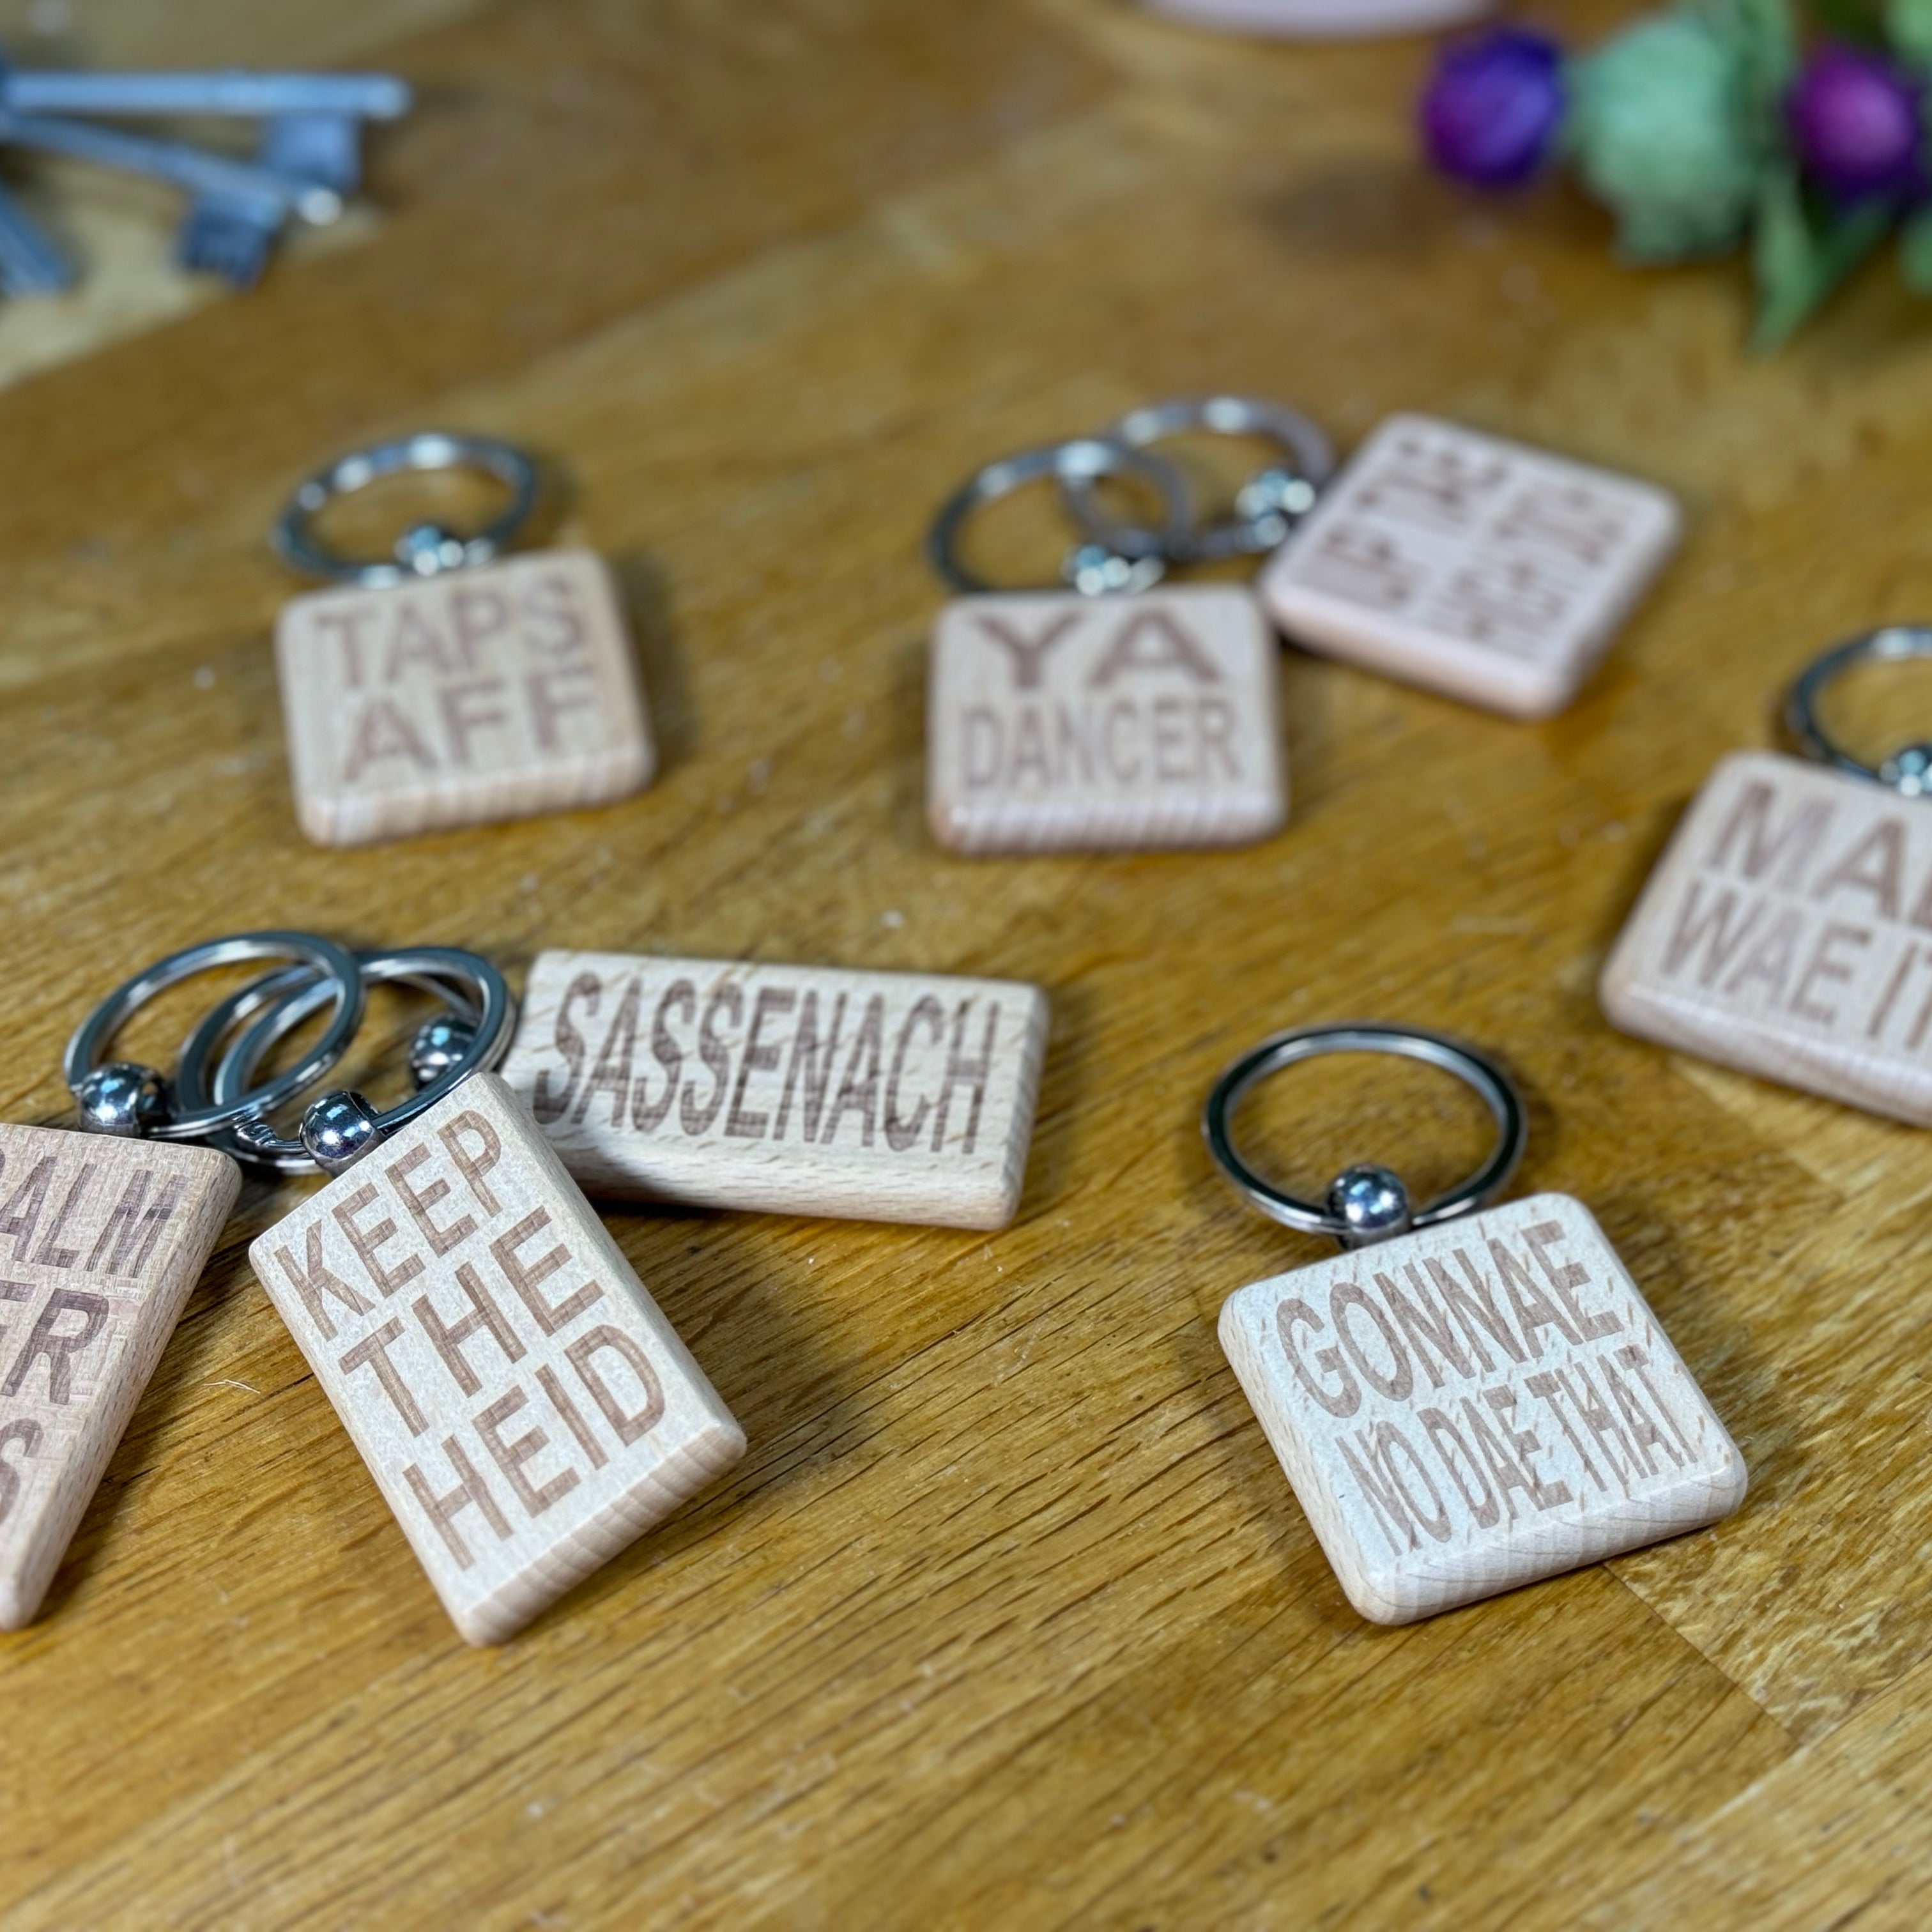 Wooden keyring collection - Scottish